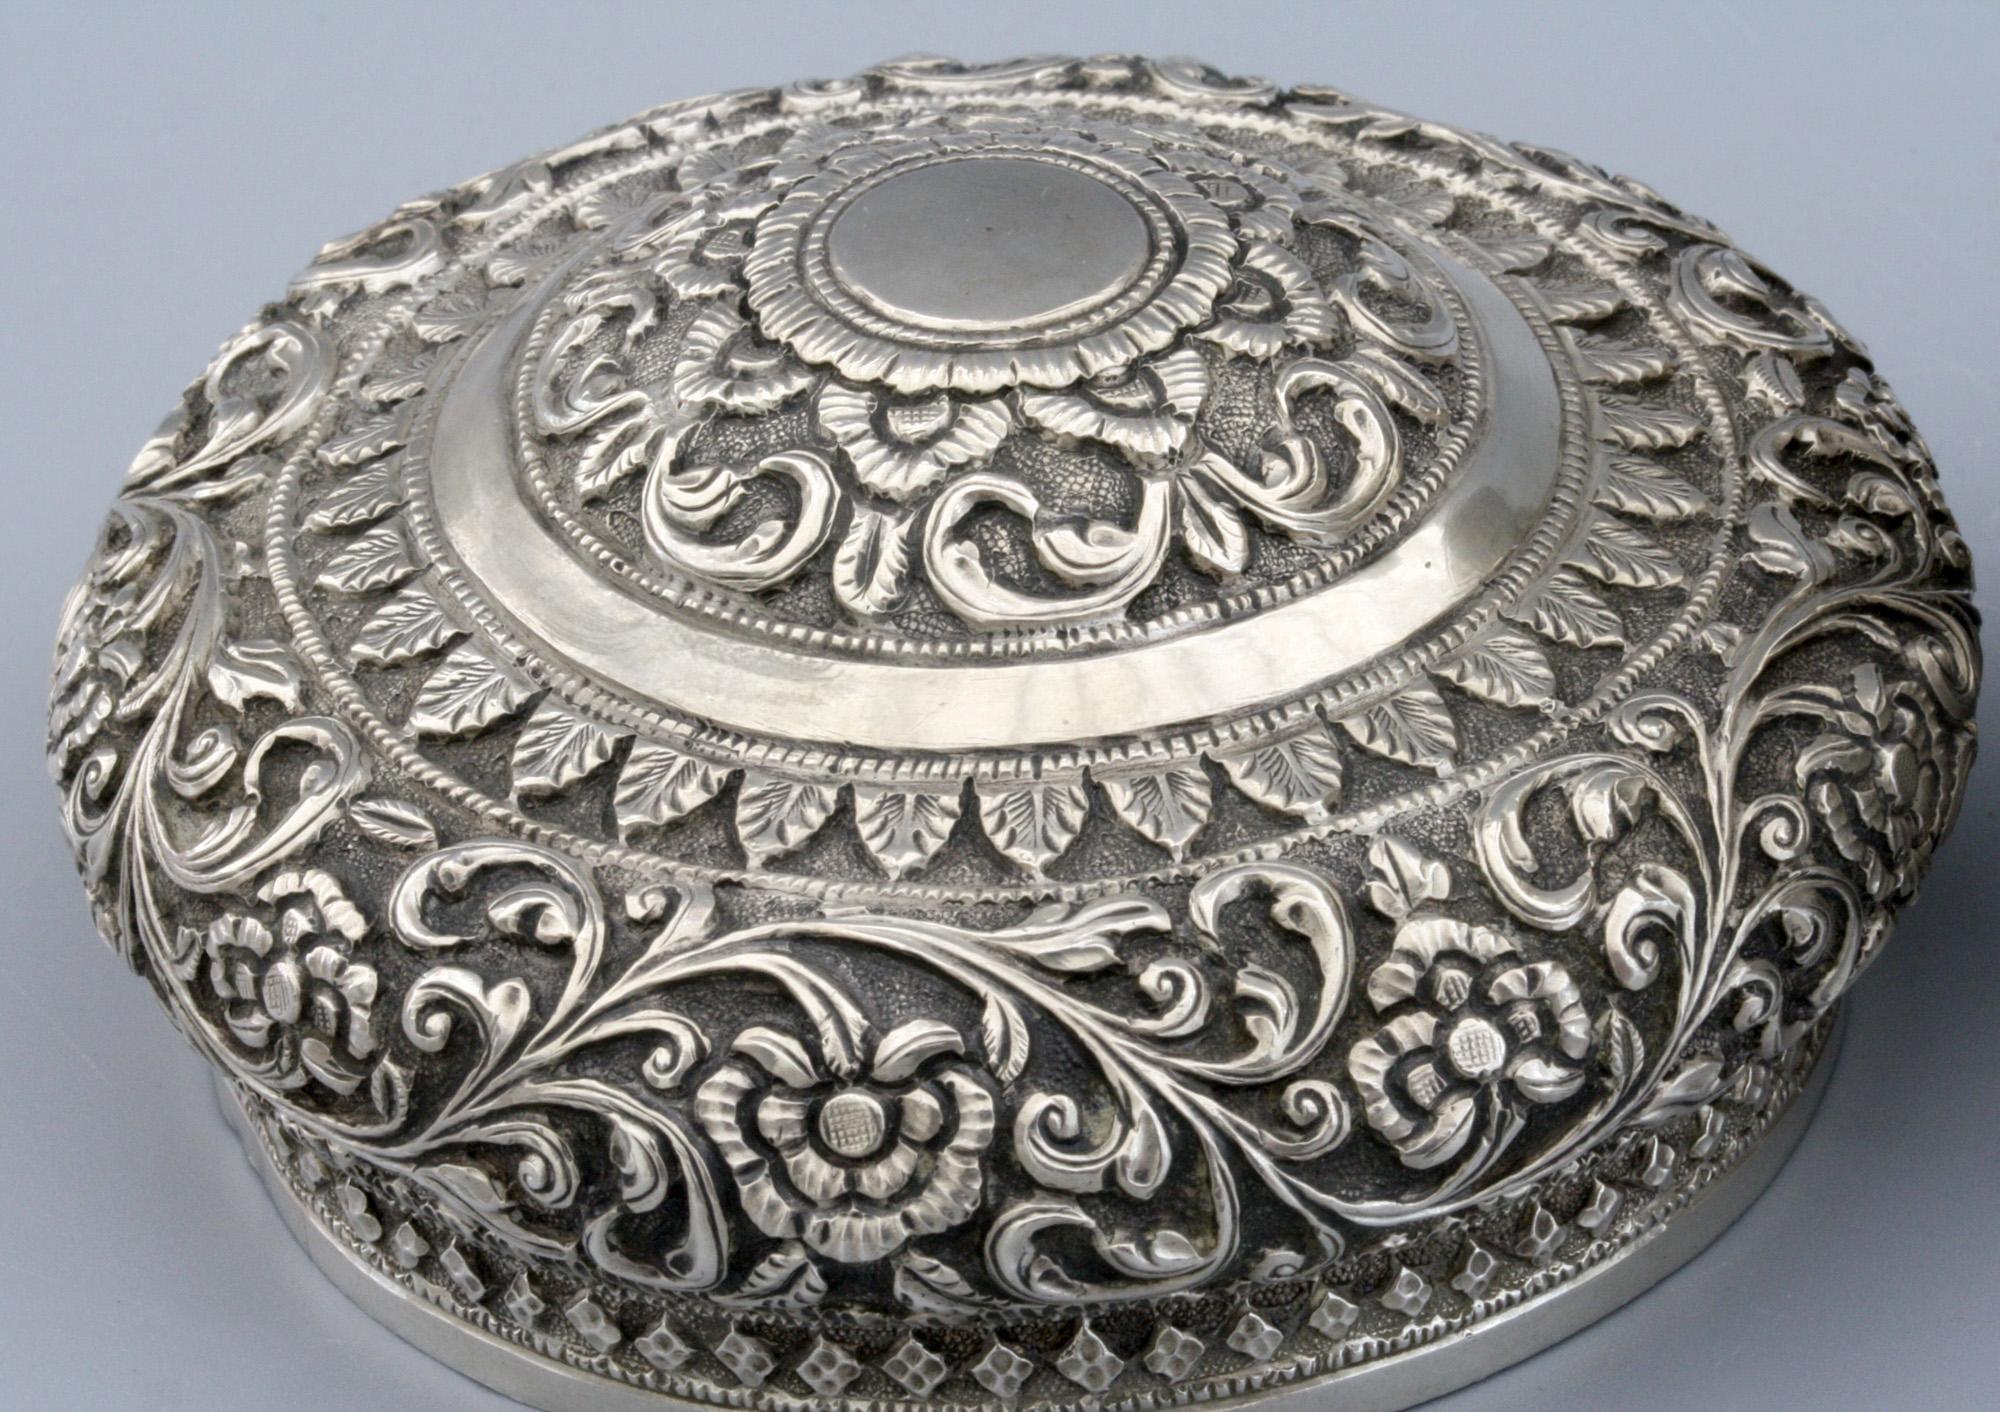 Anglo-Indian Indian Karachi Silver Lidded Tea Caddy with Animals by J Mankrai